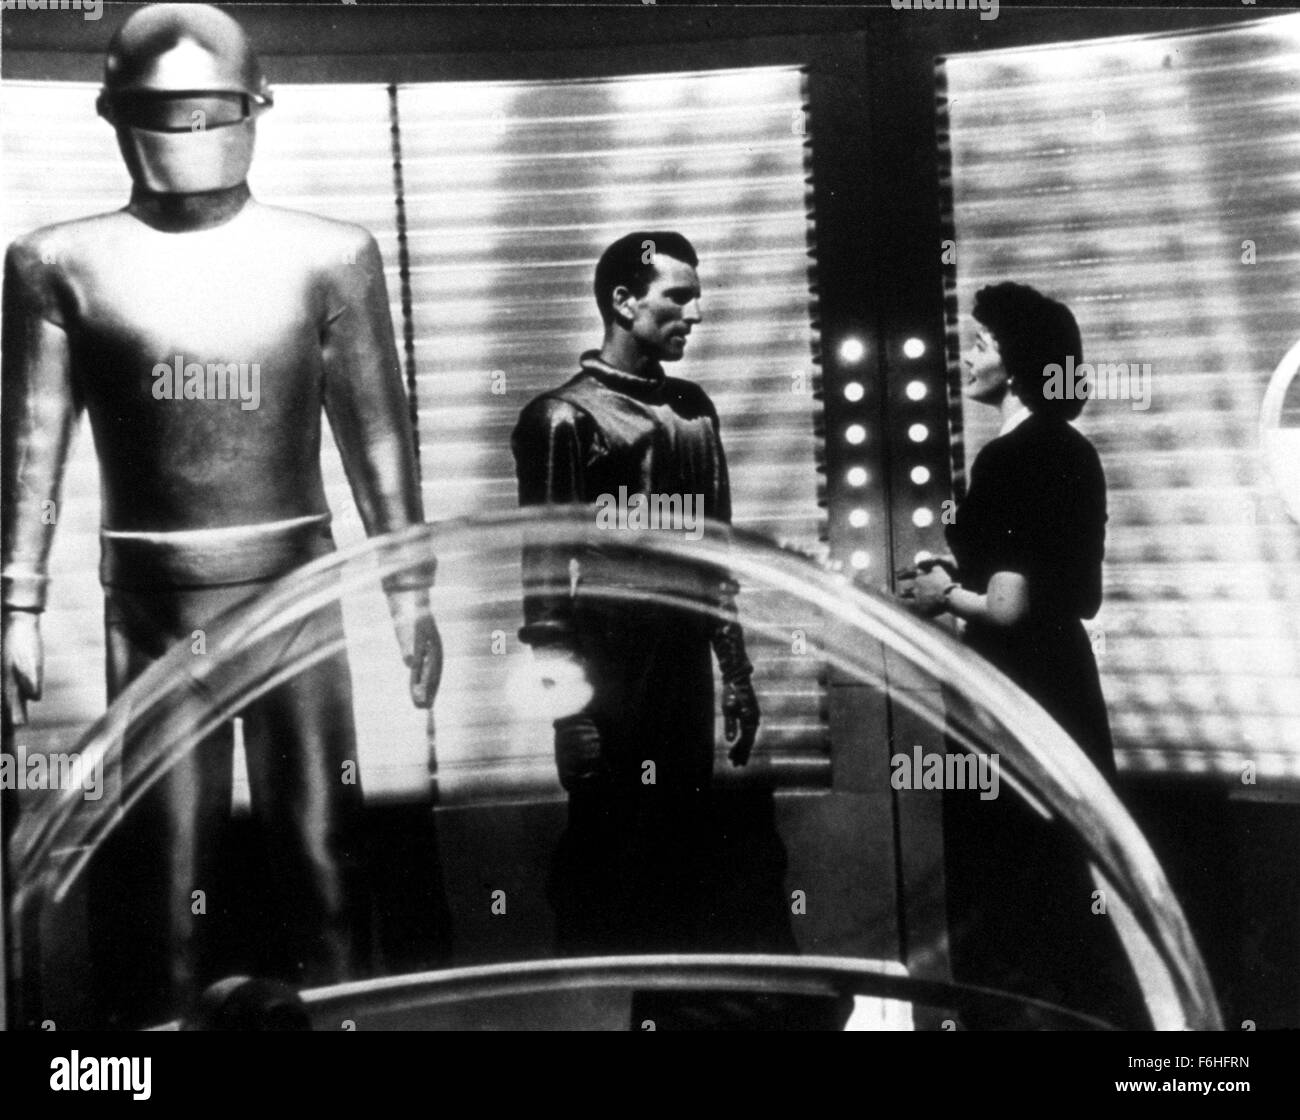 1951, Film Title: DAY THE EARTH STOOD STILL, Director: ROBERT WISE, Studio: FOX, Pictured: ALIENS (GOOD), PATRICIA NEAL, MICHAEL RENNIE, ROBOTS-ANDROIDS-CYBORGS-CLONES, SCI-FI, ROBERT WISE, FUTURISTIC, ROBOT. (Credit Image: SNAP) Stock Photo